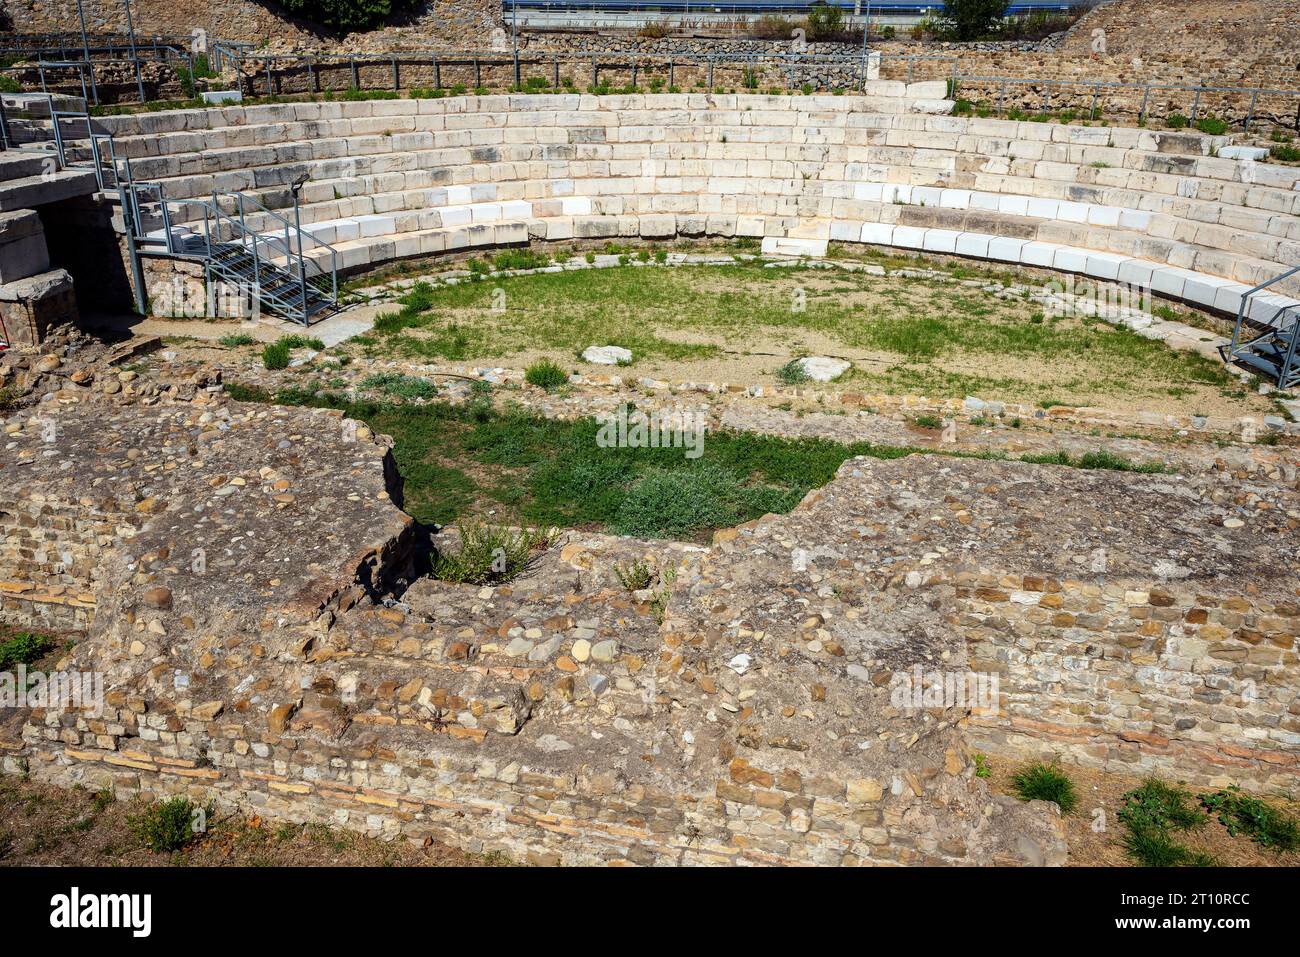 Remains of a Roman theatre (first half of the 2nd century) is the oldest monuments in Ventamiglia. Liguria region, Italy. Stock Photo